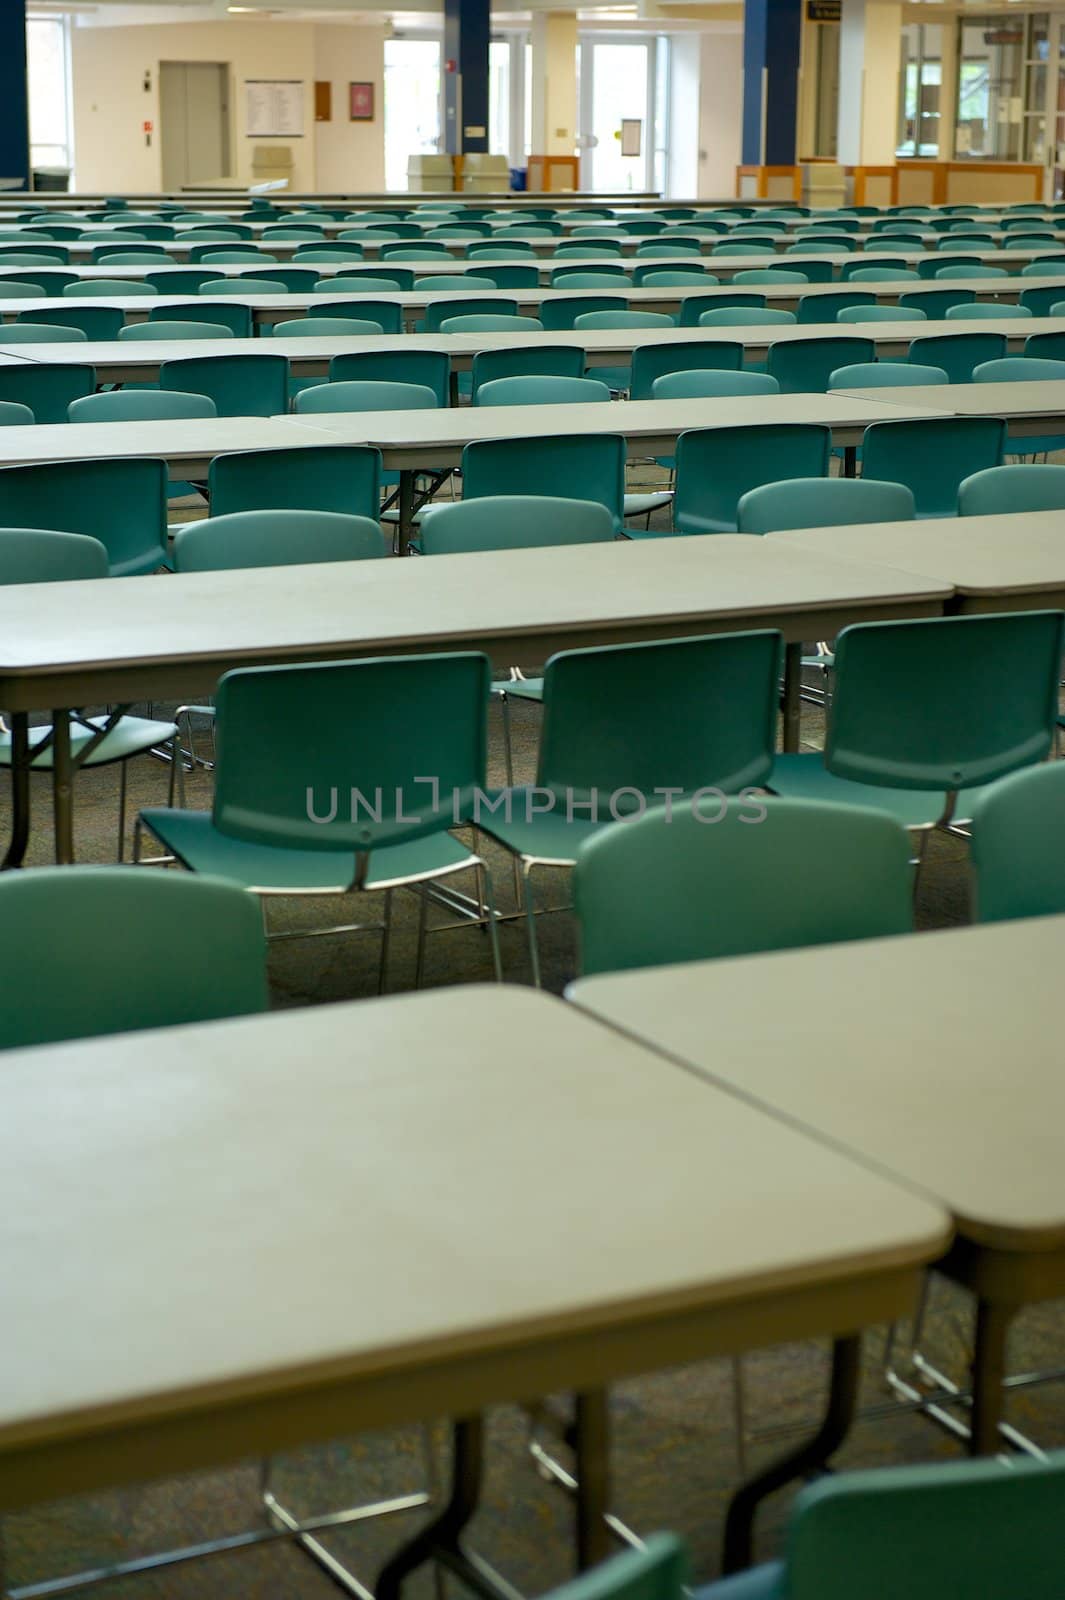 Large Classroom With Tables by pixelsnap